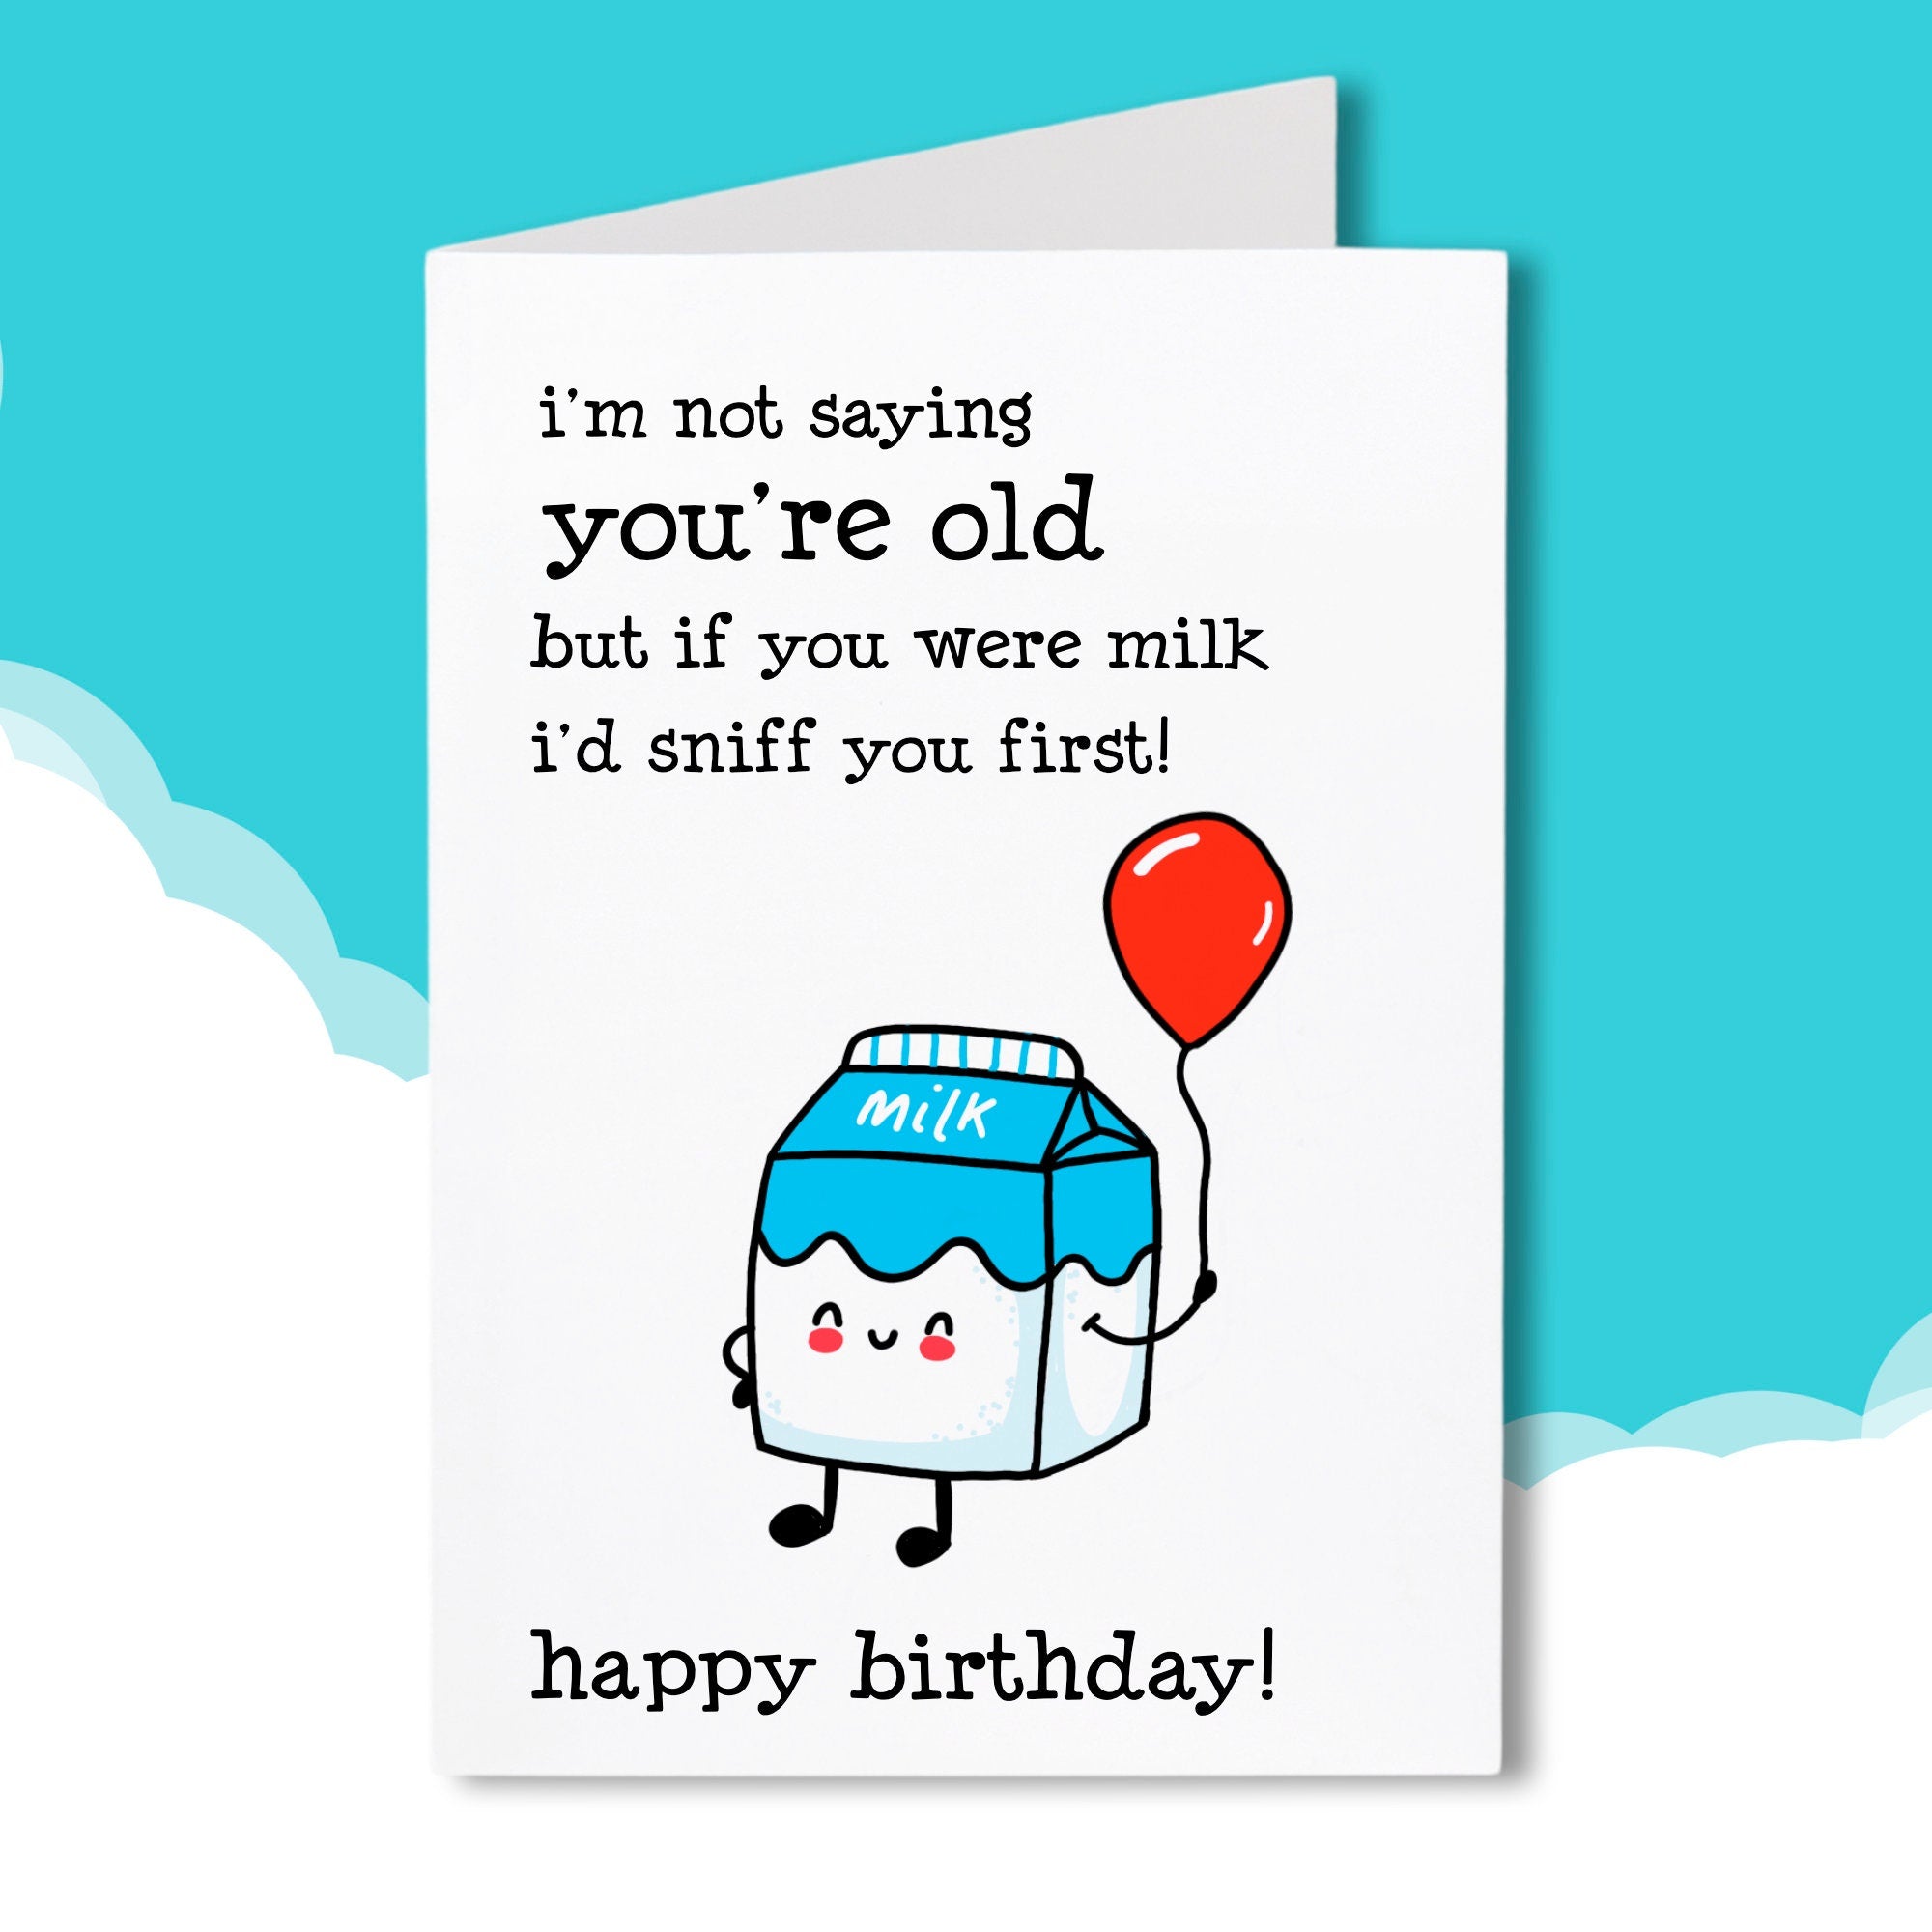 Funny Birthday Card, You're Old, Birthday Card for him or her, i'm not saying you're old but if you were milk i'd sniff you first, Joke